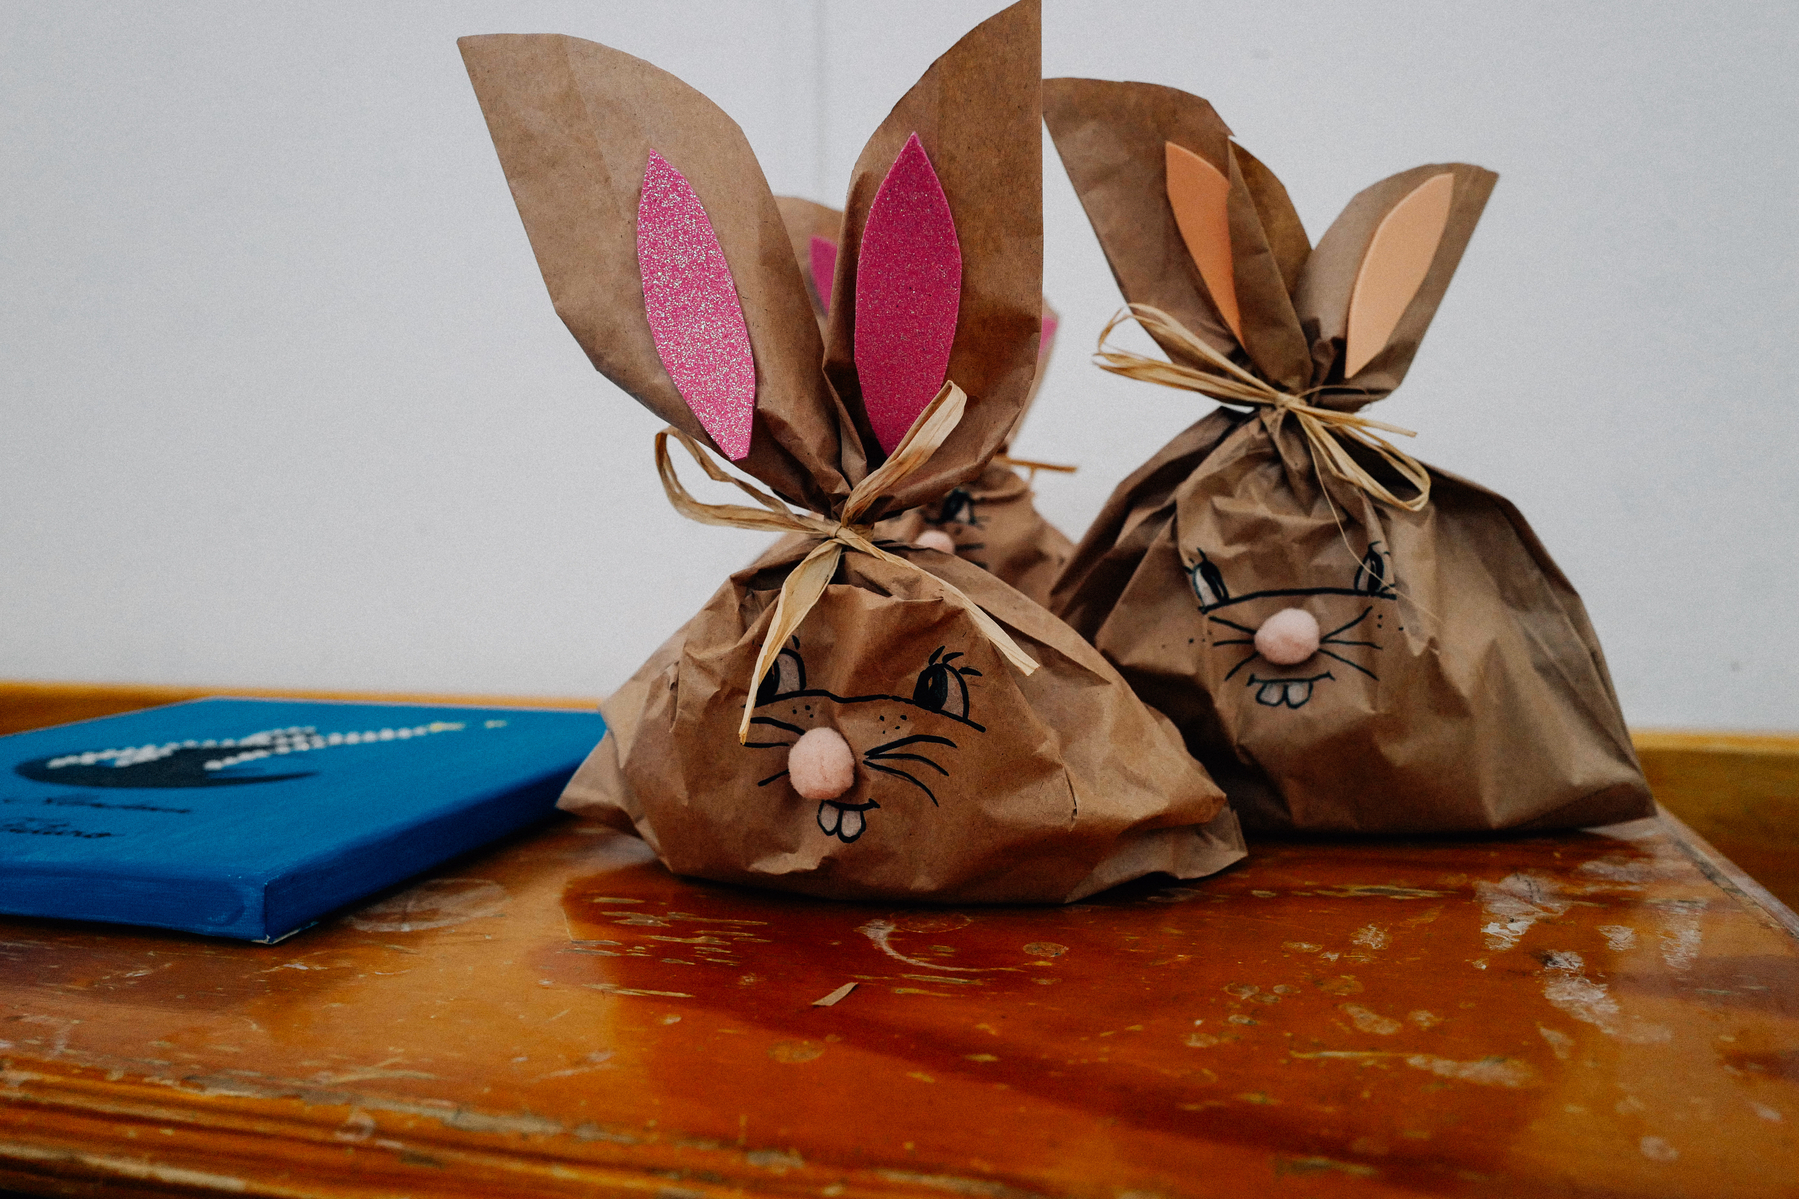 Three bunny-shaped gift bags with drawn faces and ears made of paper on a wooden table, with a book lying to the side.